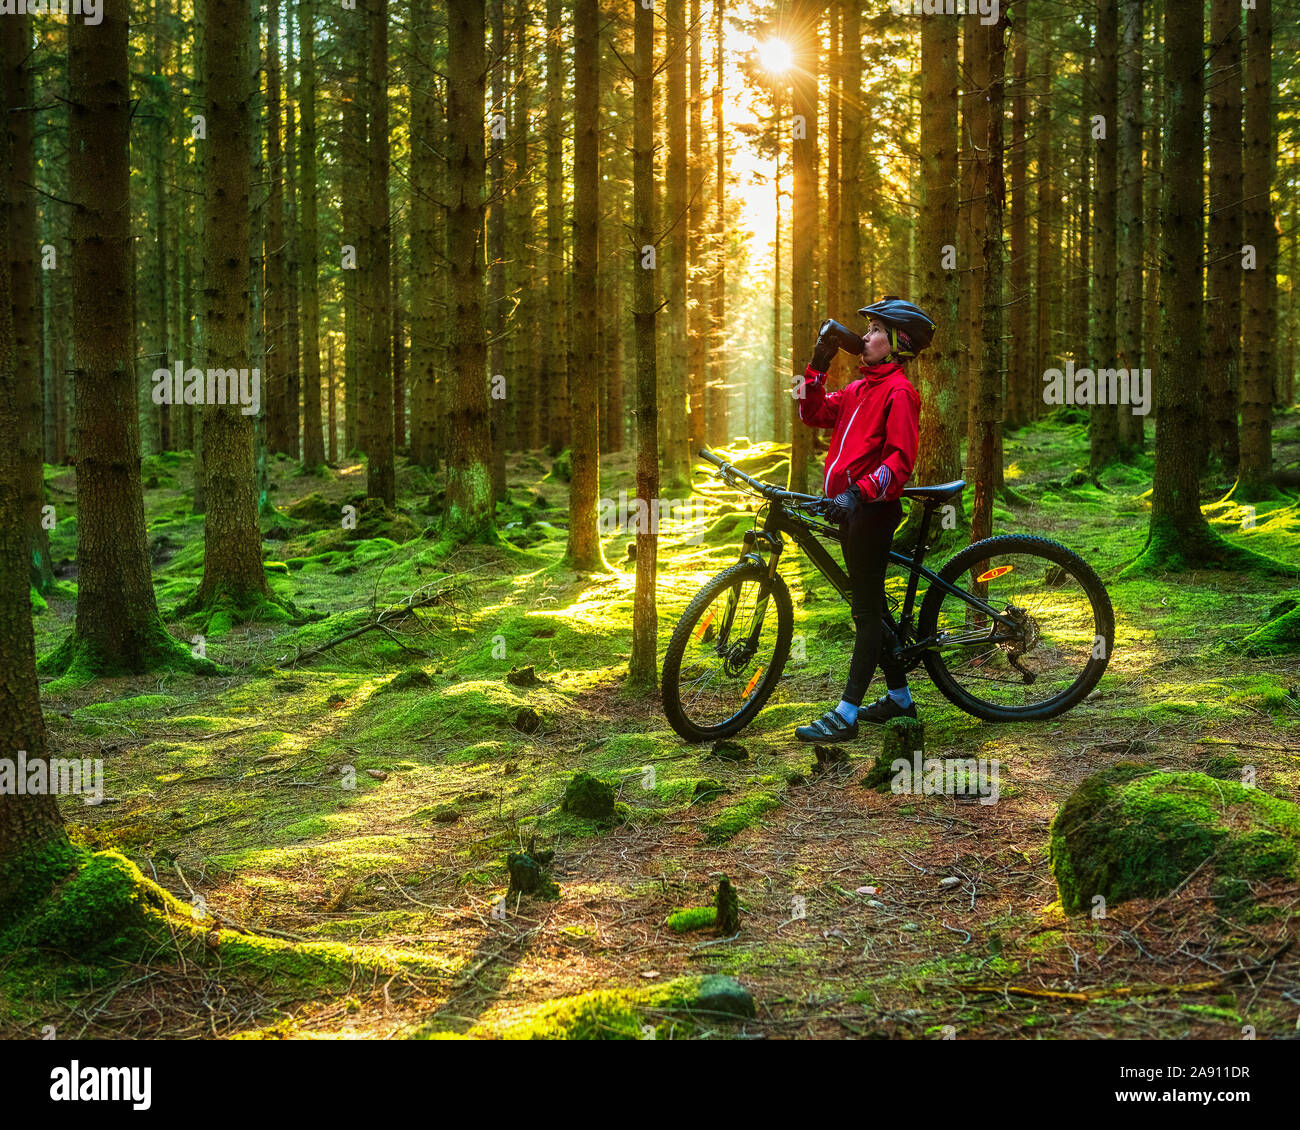 Cyclist in forest Stock Photo